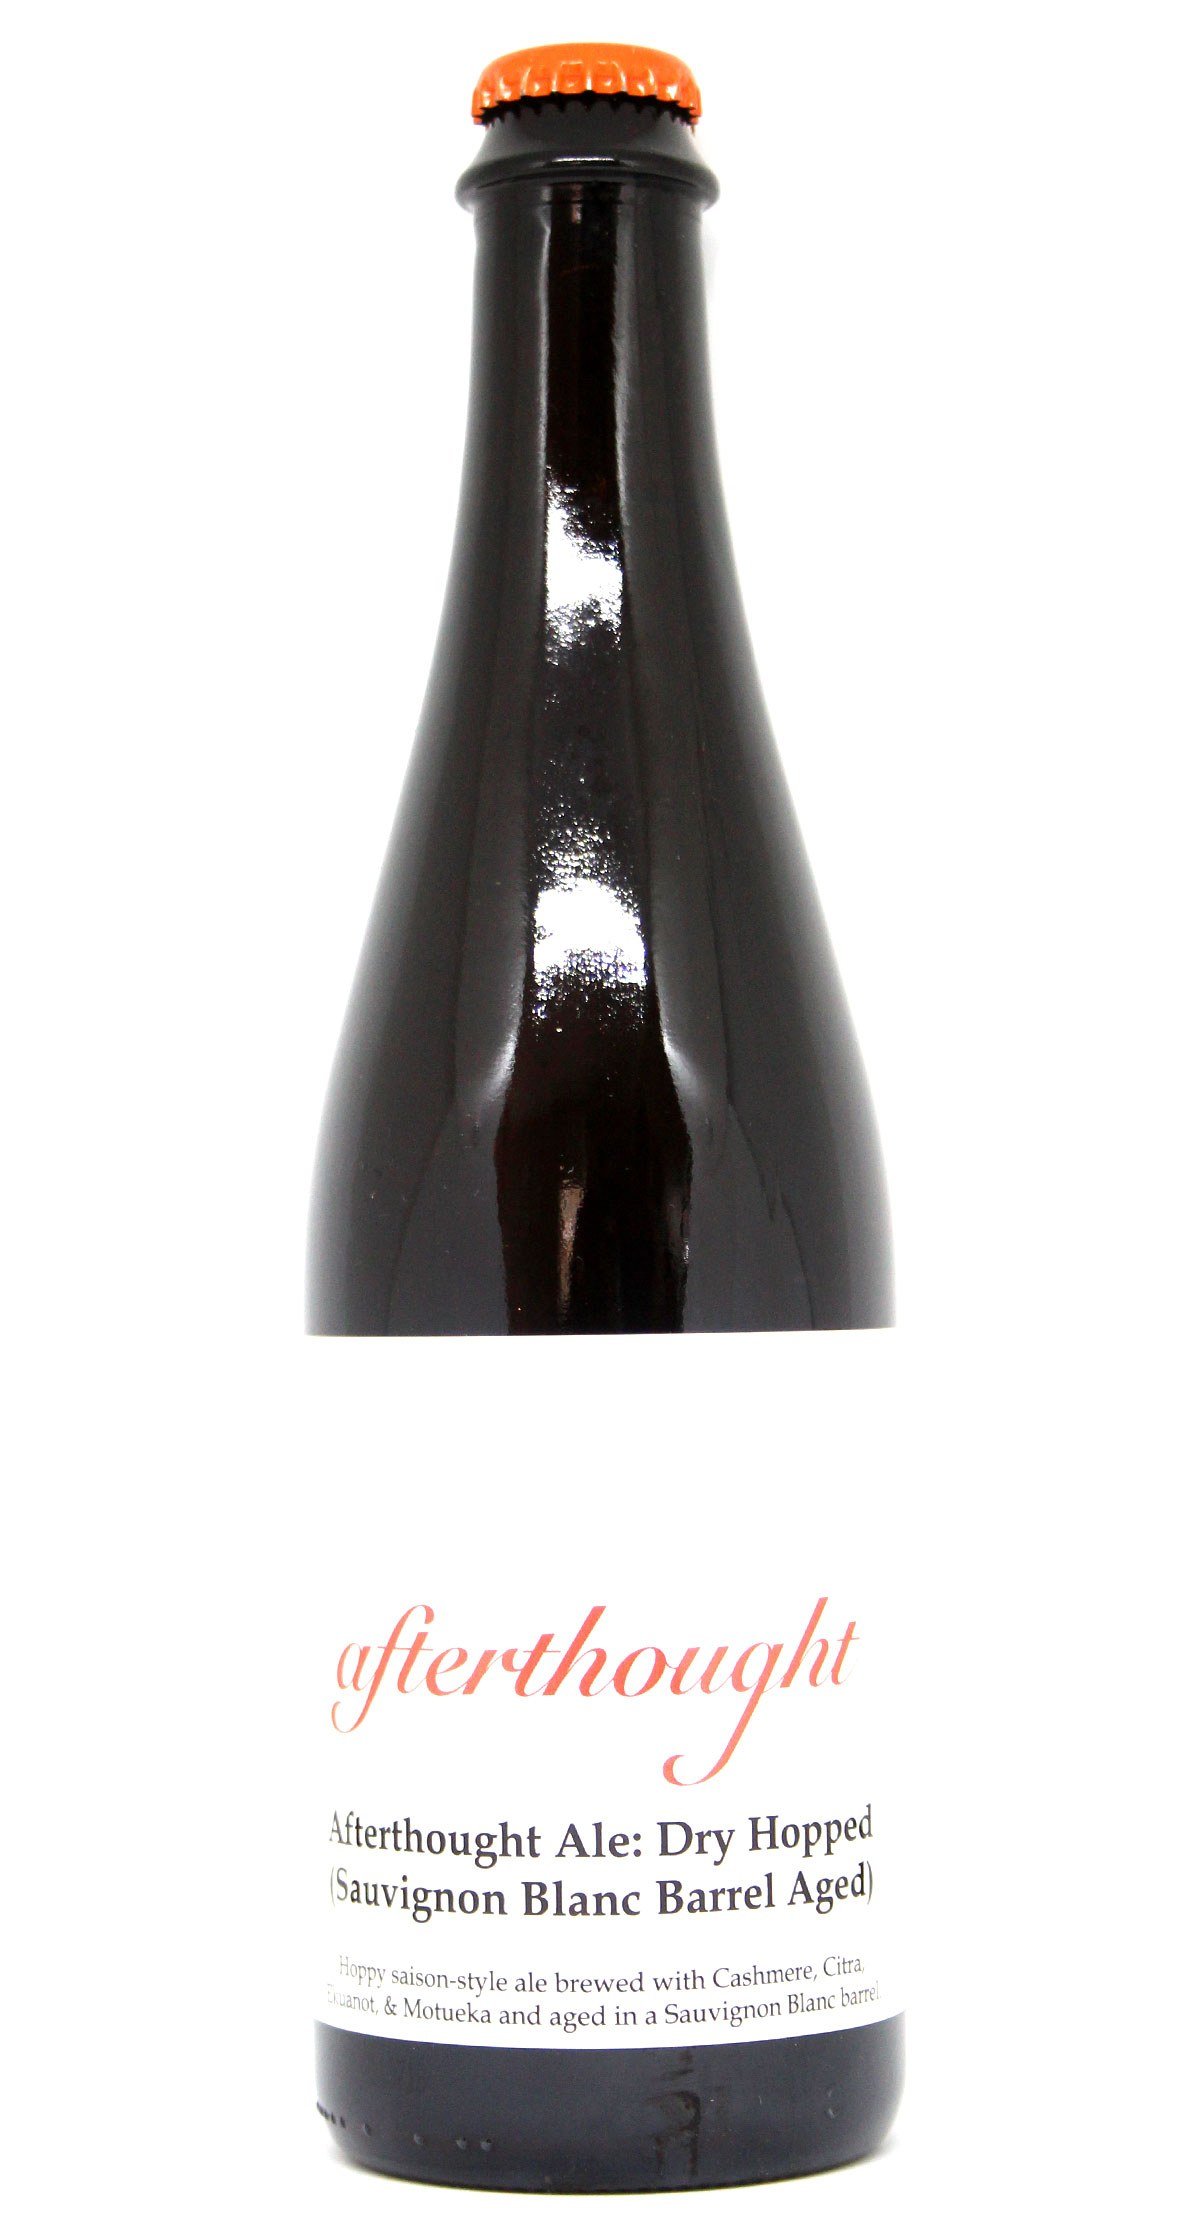 Afterthought Ale: Dry Hopped (Sauvignon Blanc Barrel Aged)